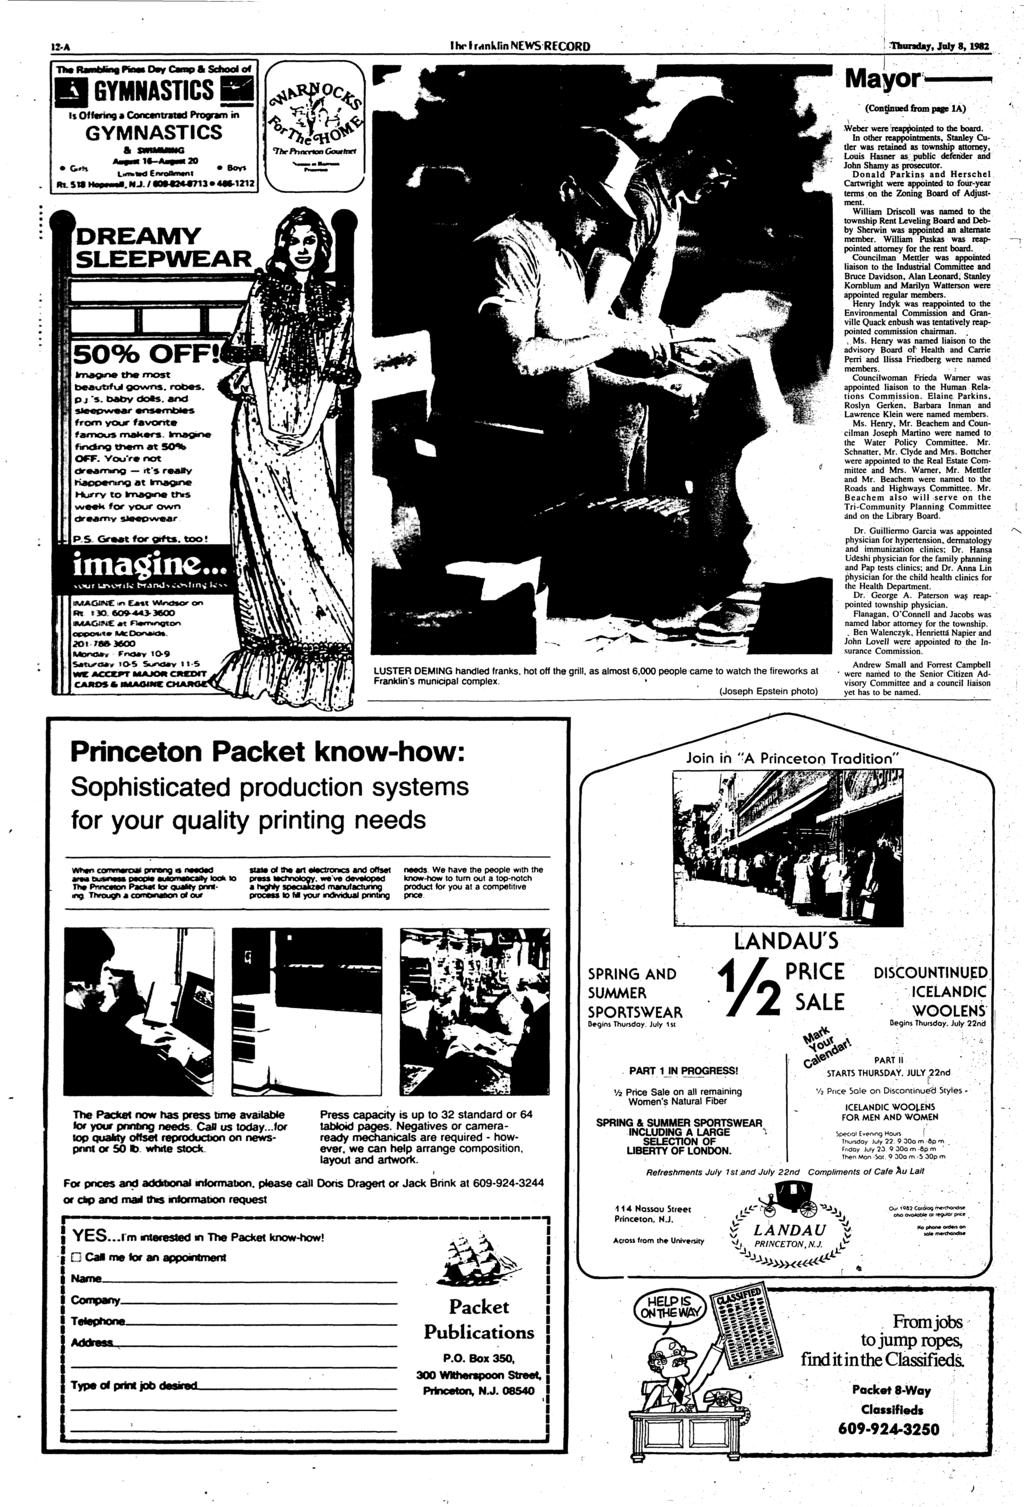 Tlw RamfeMnfl « Day Camp & School of GYMNASTICS is Offering a Conctntrstad Program in GYMNASTICS DREAMY I hr I rnnklin NEWS RECORD Thursday, July 8,1982 LUSTER OEMING handled franks, hot off the